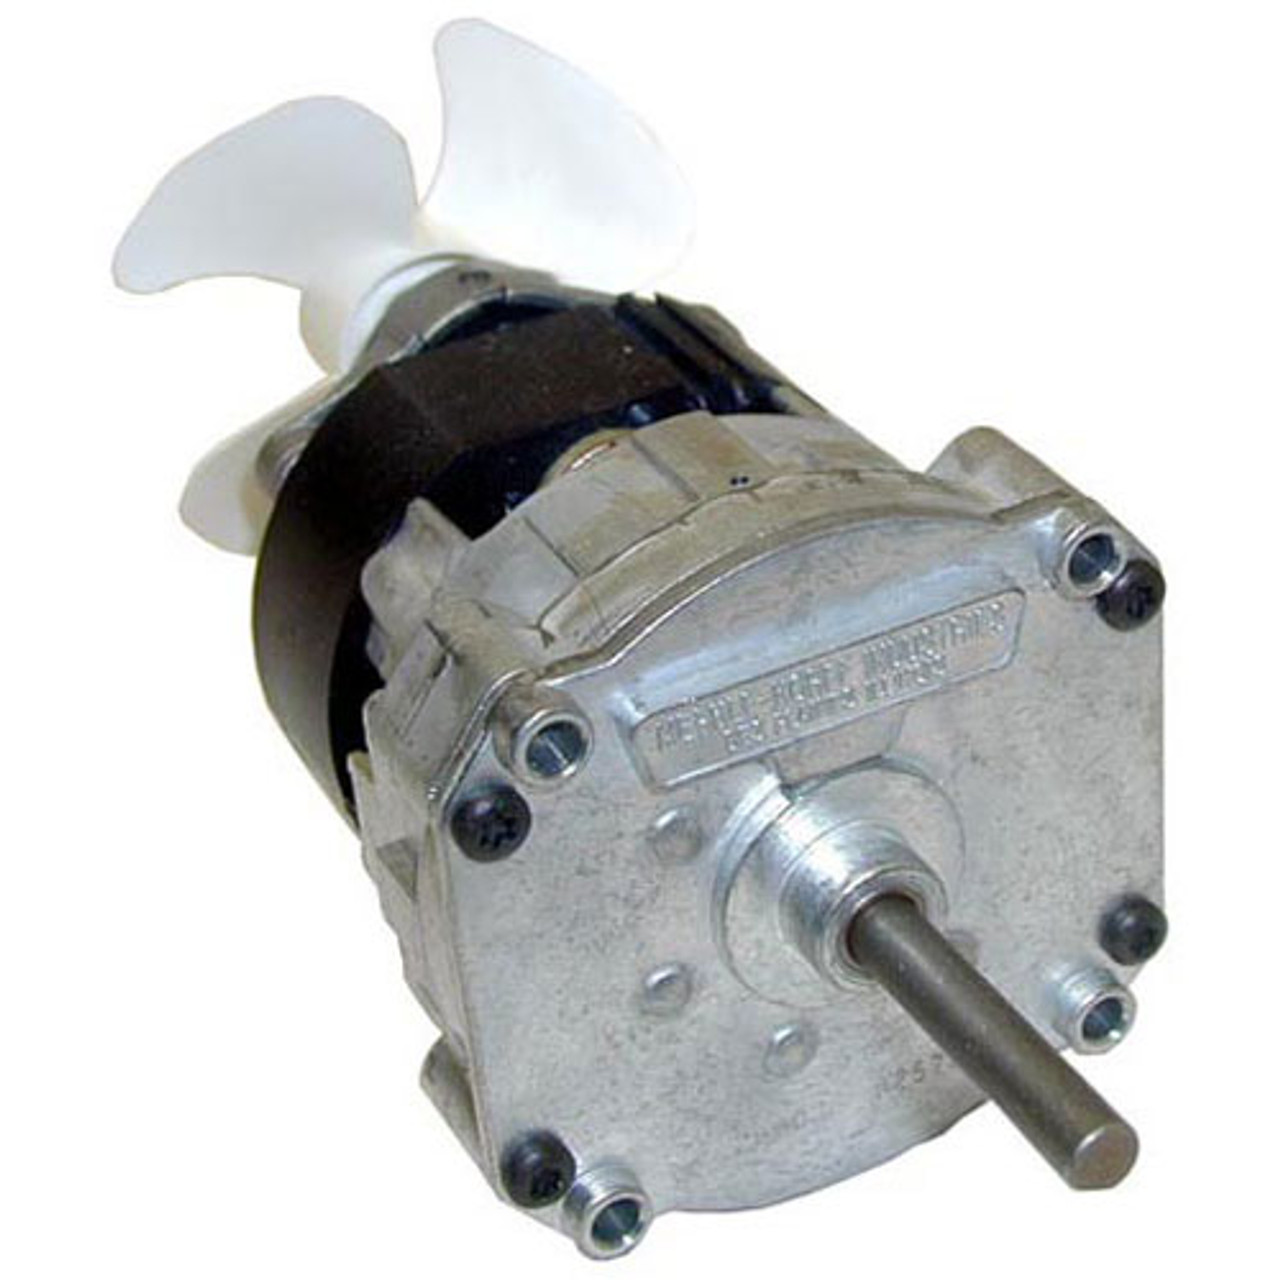 Gear Motor 230V, 6.3 Rpm - Replacement Part For Hatco 02.12.021